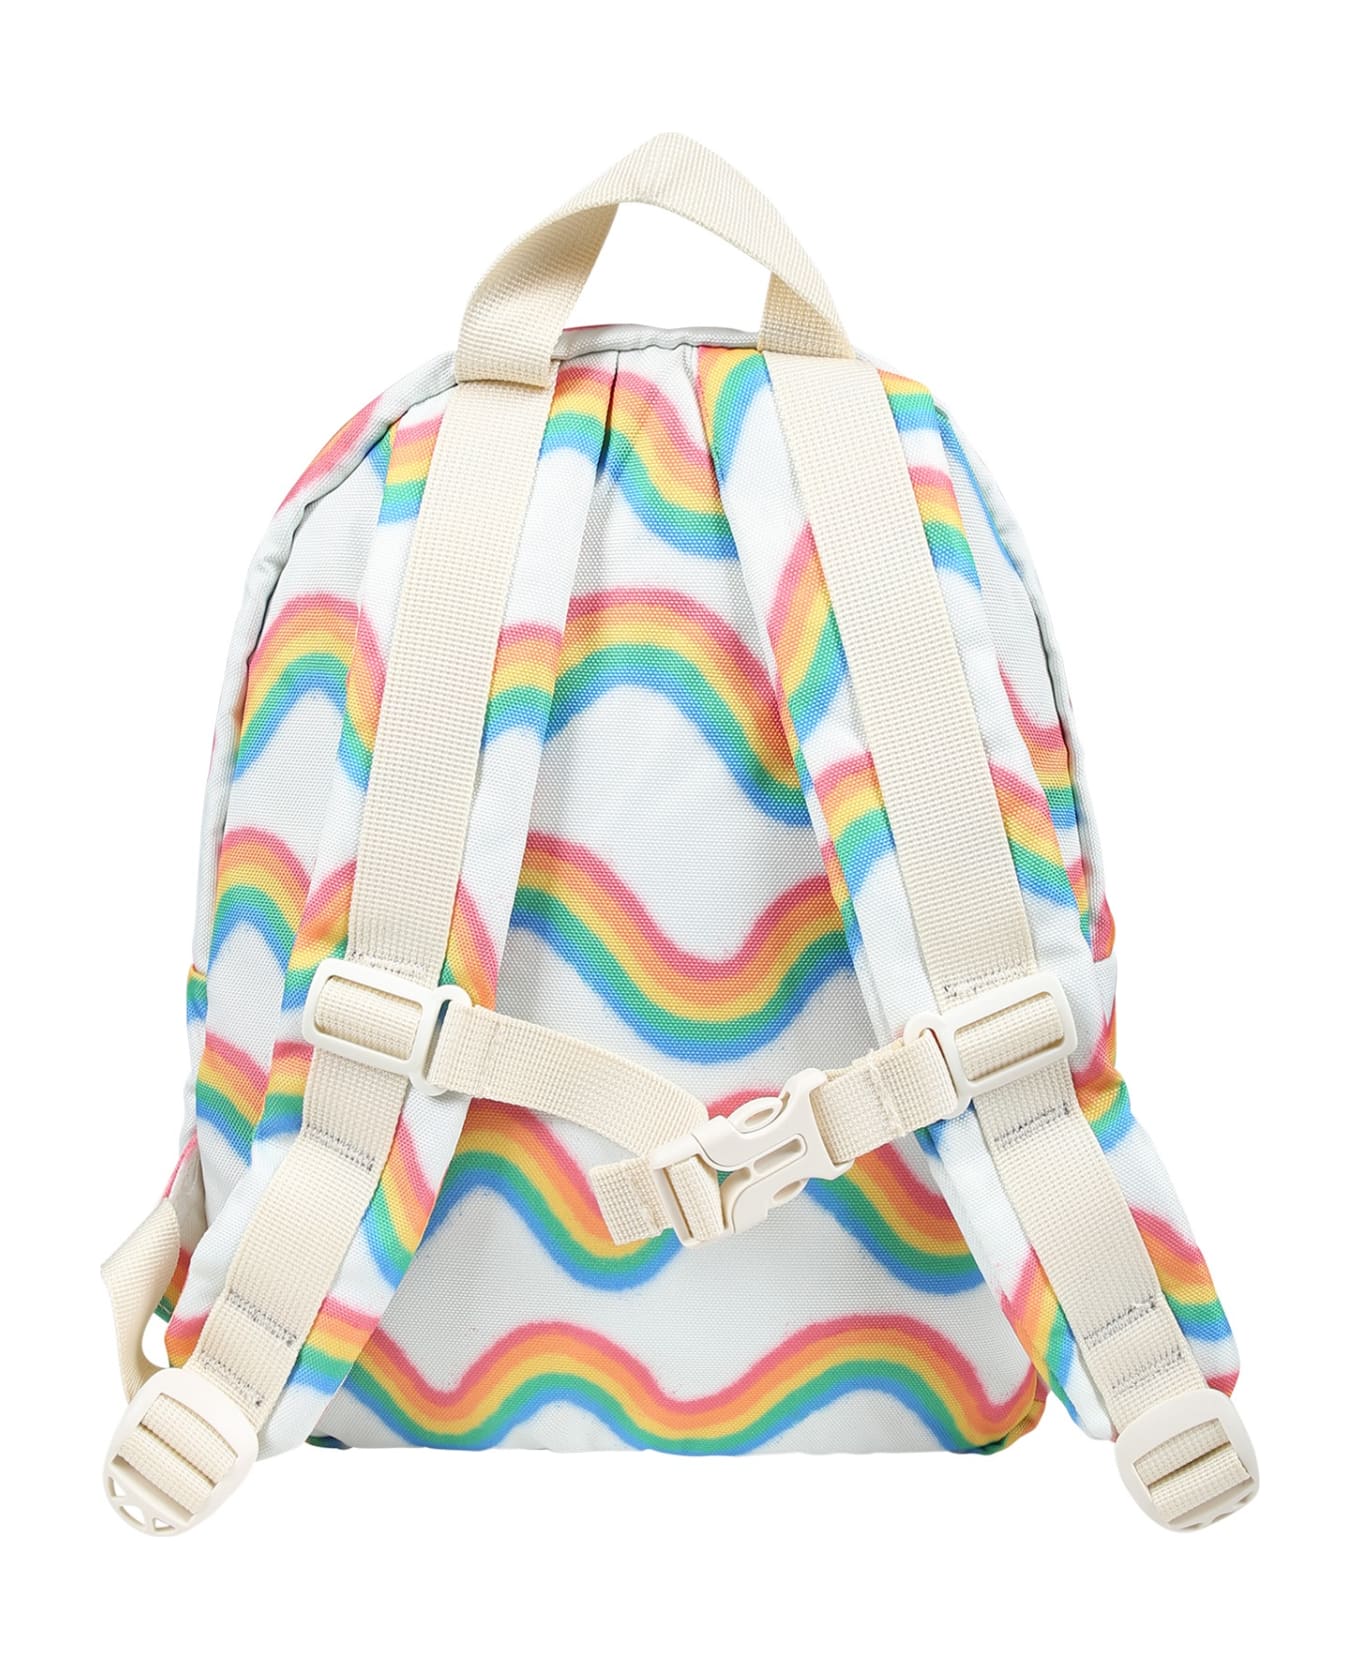 Molo White Backpack For Kids With Rainbow Print - Multicolor アクセサリー＆ギフト